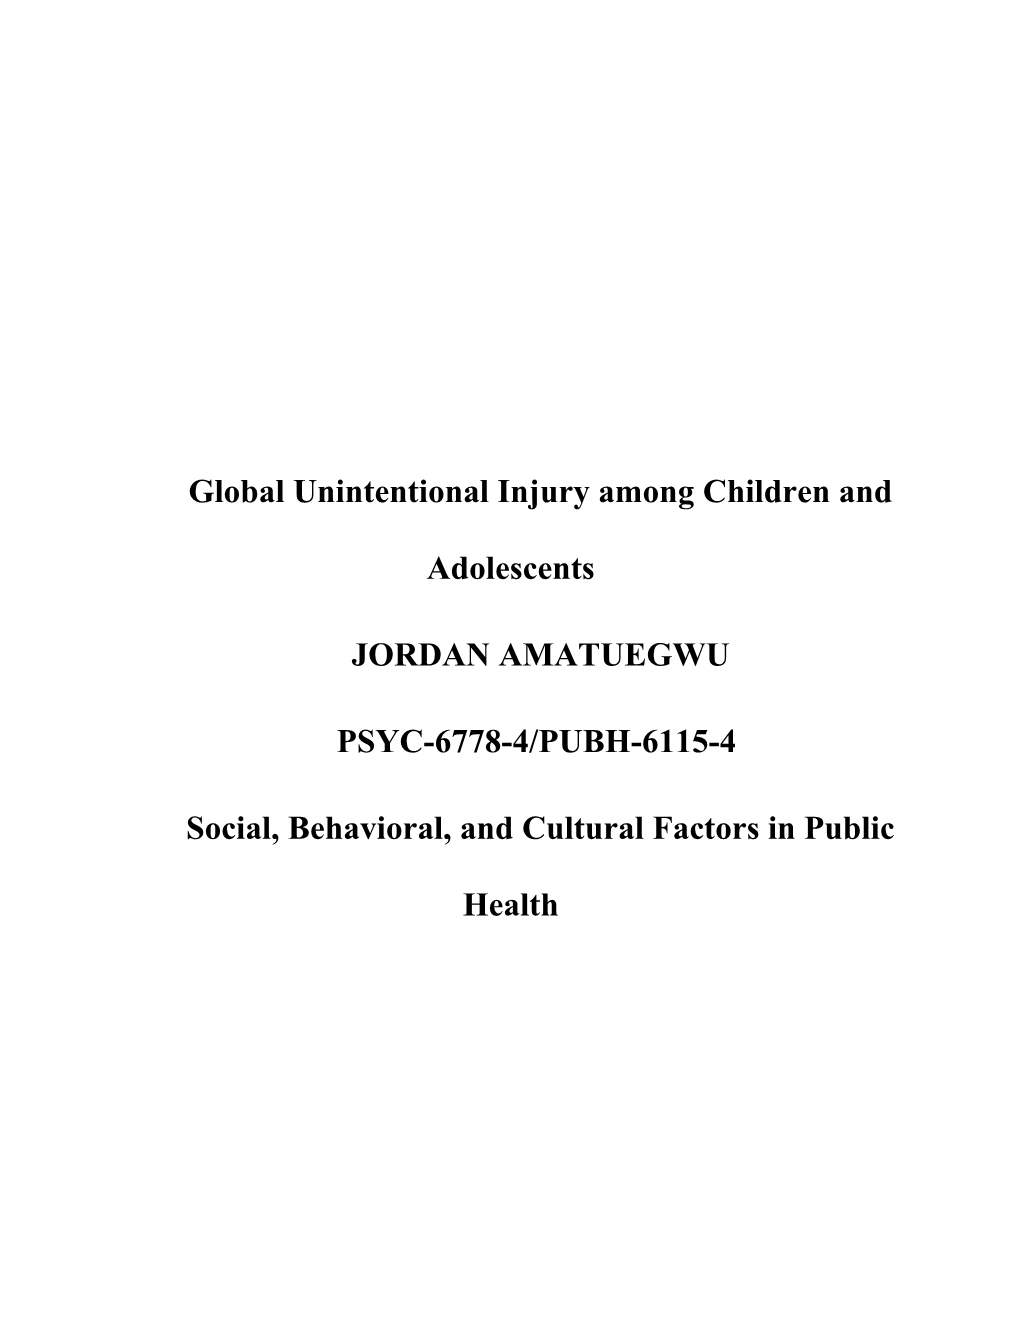 Global Unintentional Injury Among Children and Adolescents